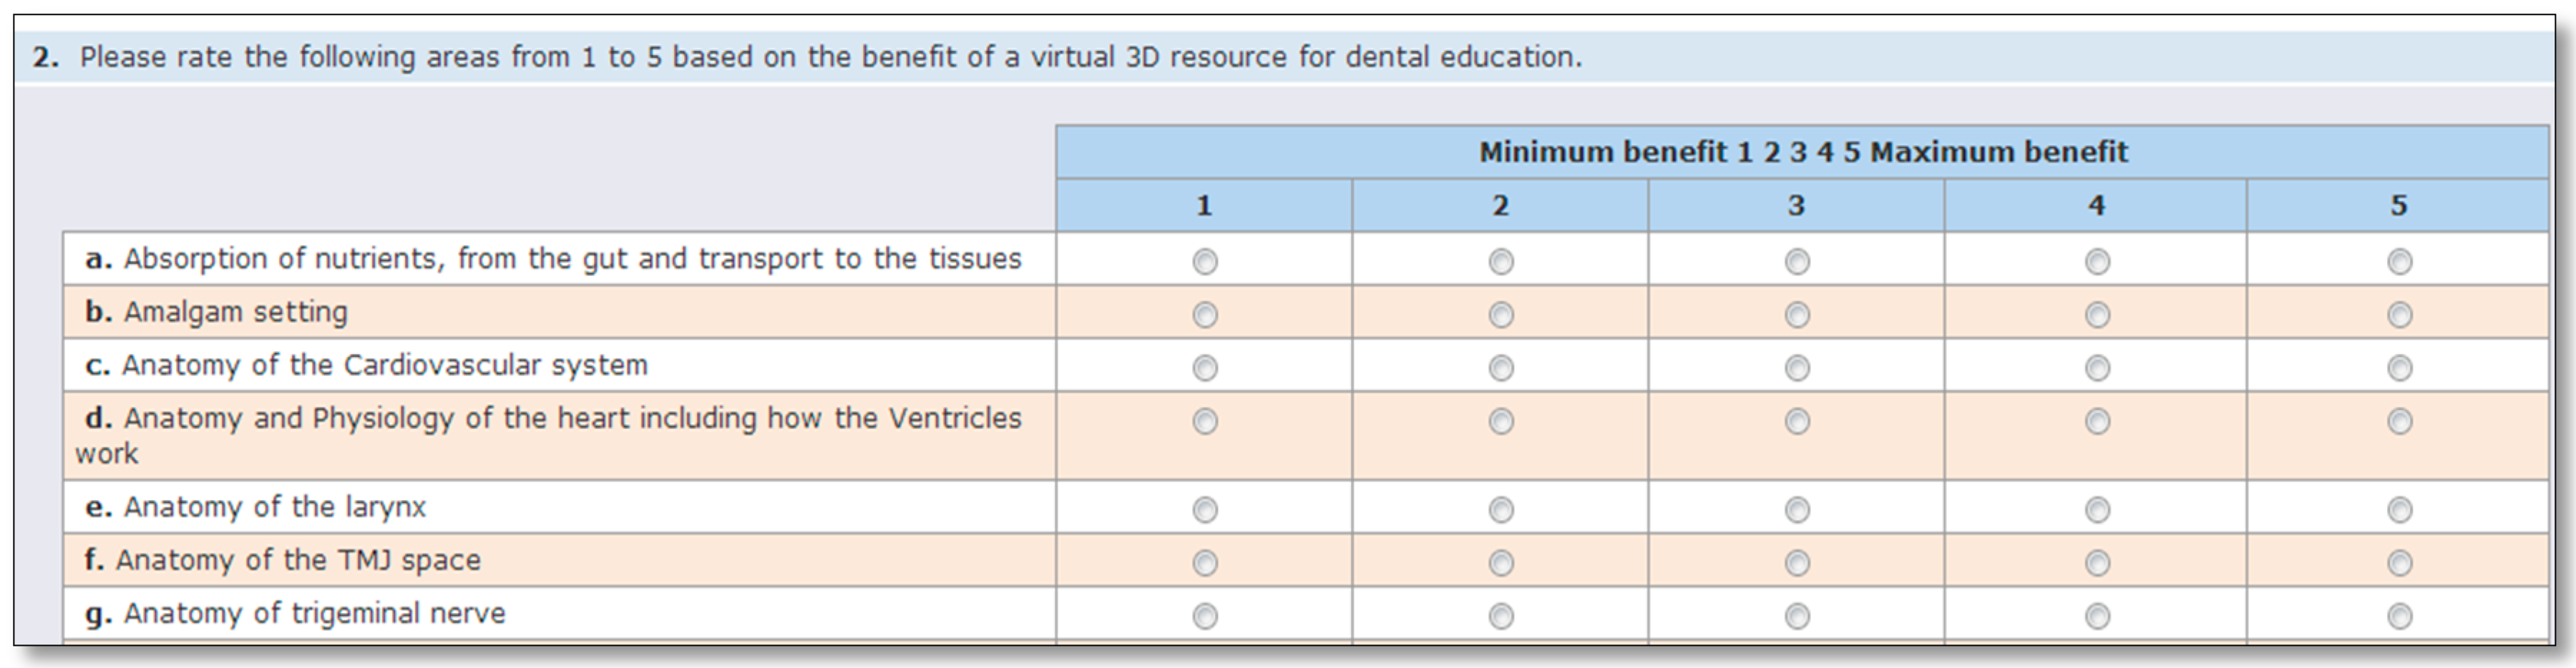 Dentistry Journal Free Full Text 3d Technology Development And Dental Education What Topics Are Best Suited For 3d Learning Resources Html